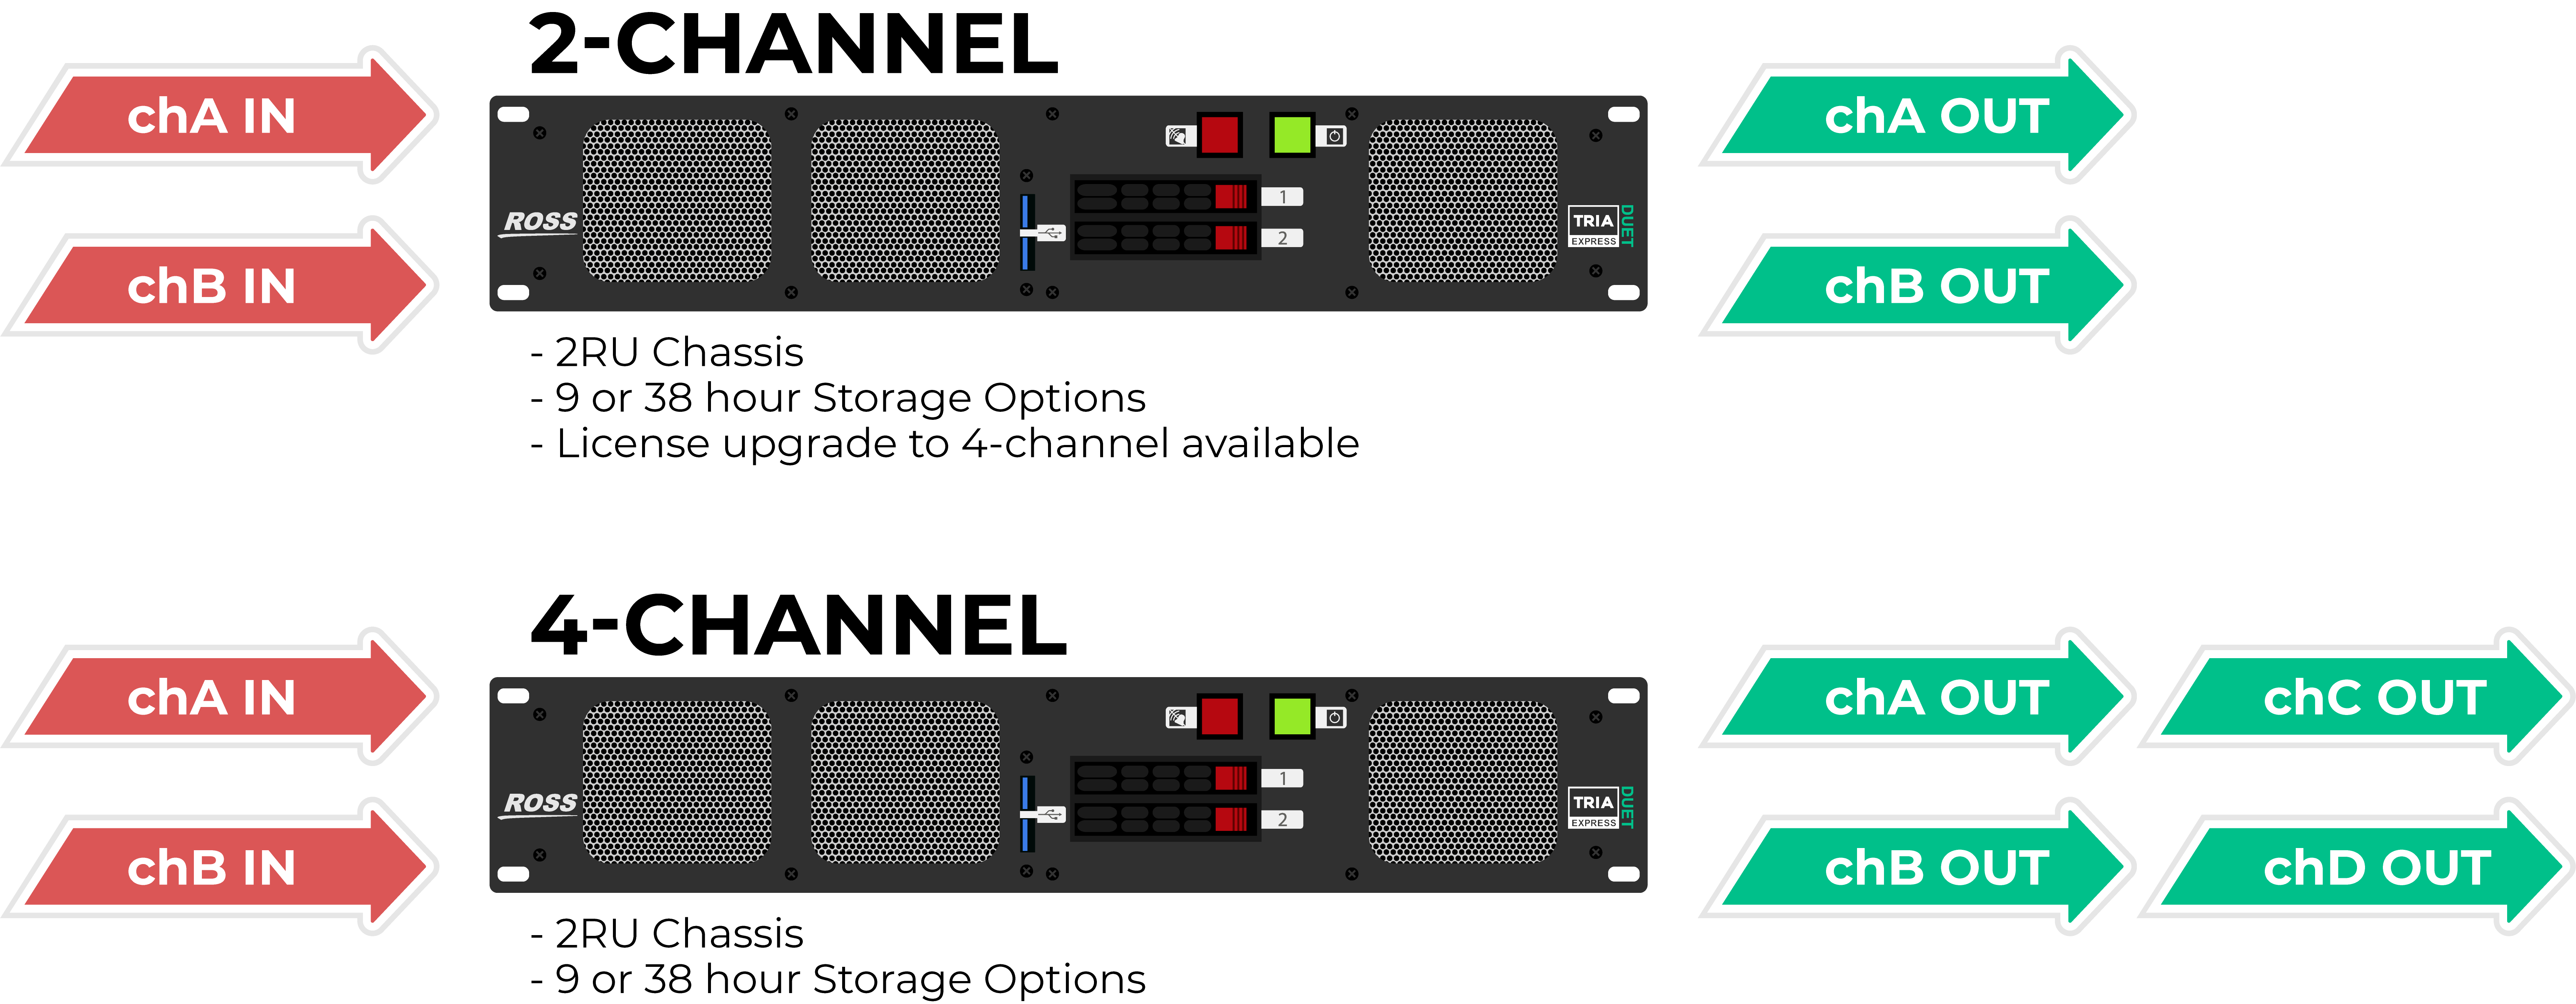 Diagram illustrating the differences between 2-channel and 4-channel options